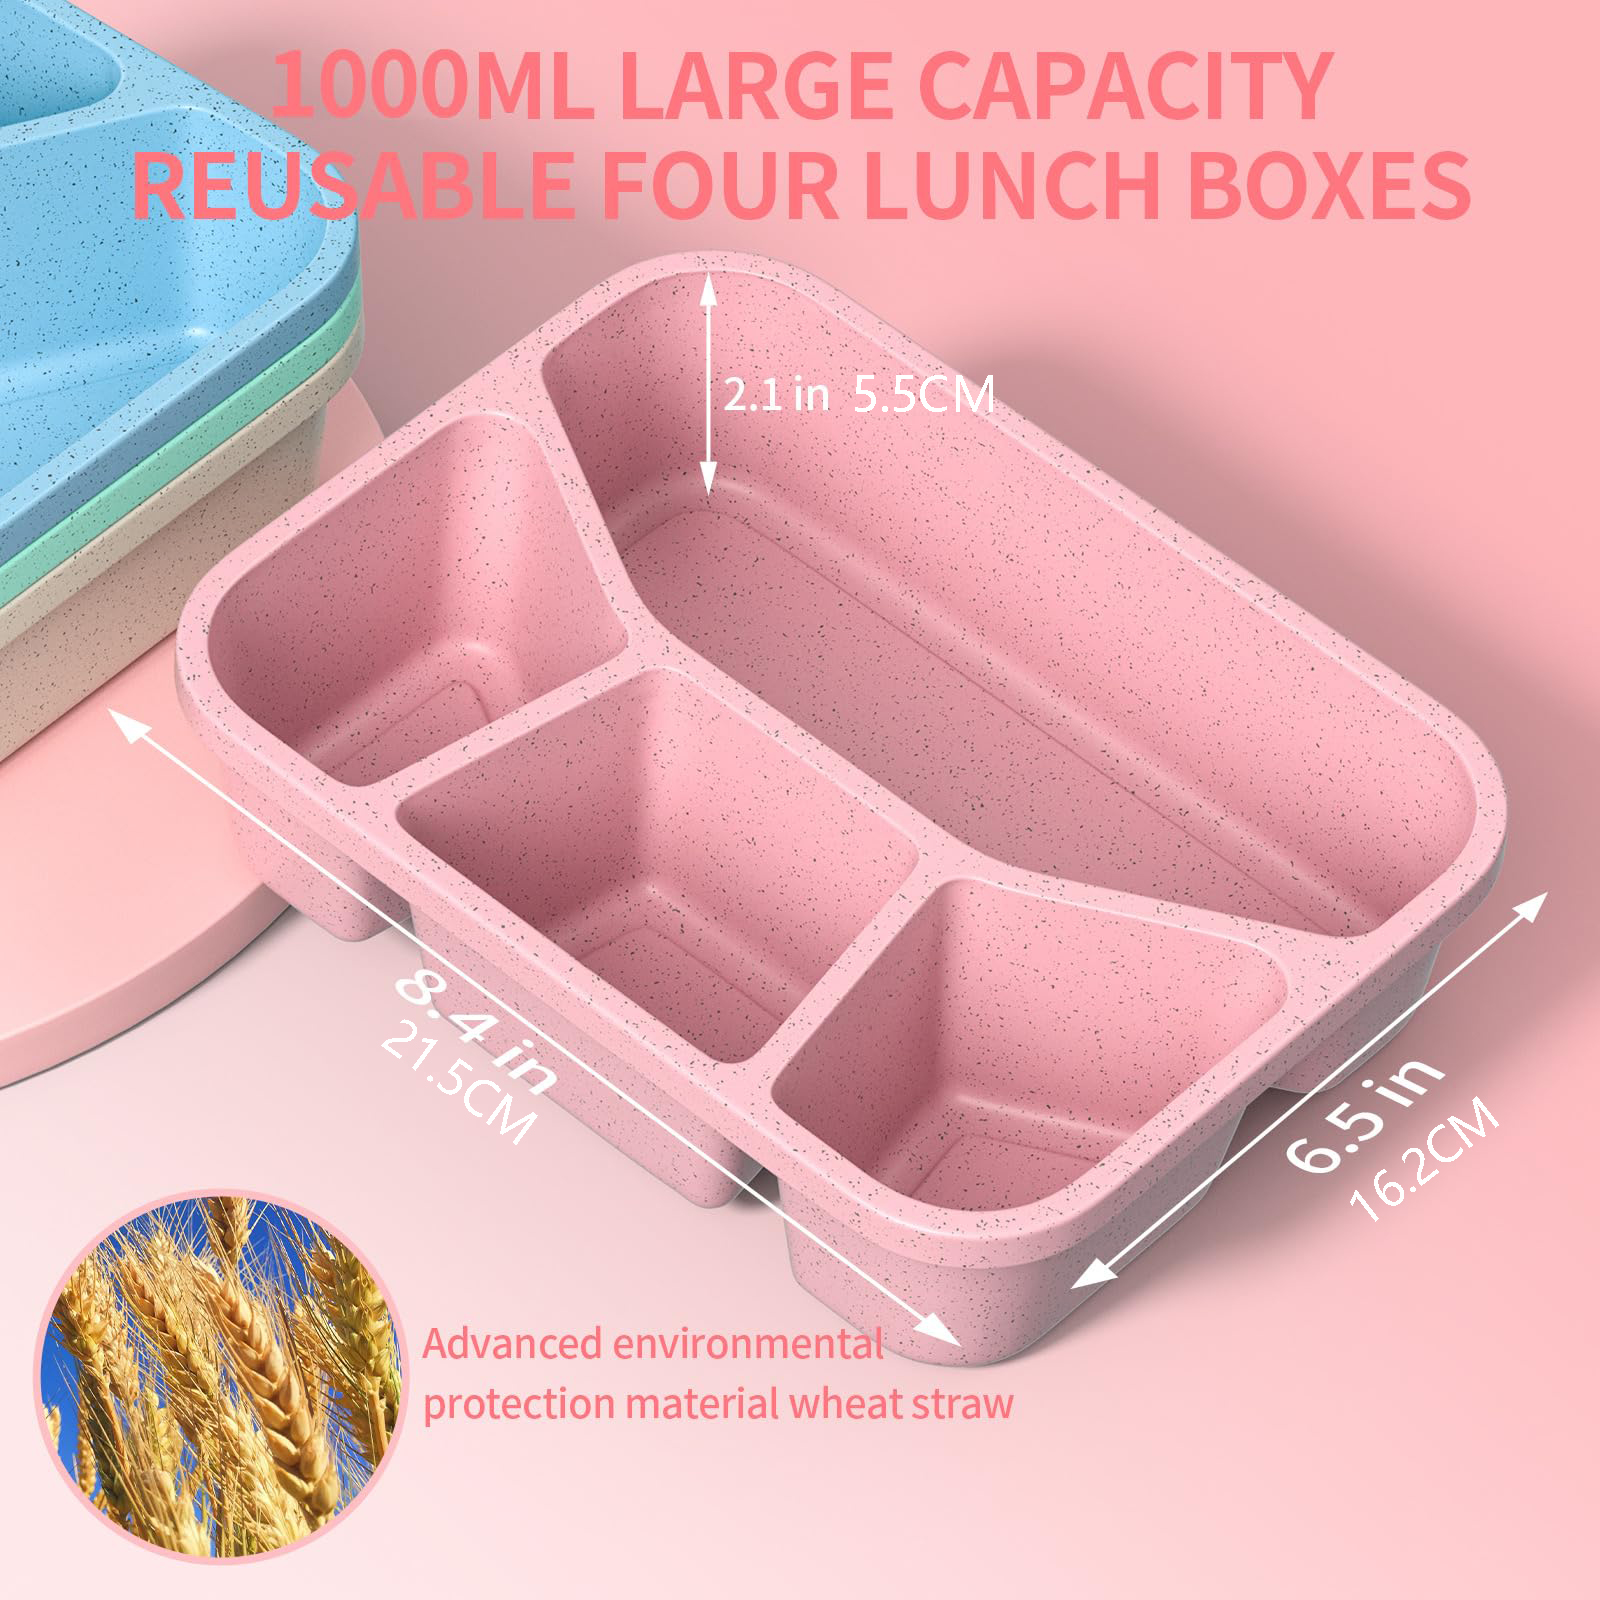 Bento Lunch Box 4 Compartment with Lid - PACK50/CTN600 (12PKT X 50'S)